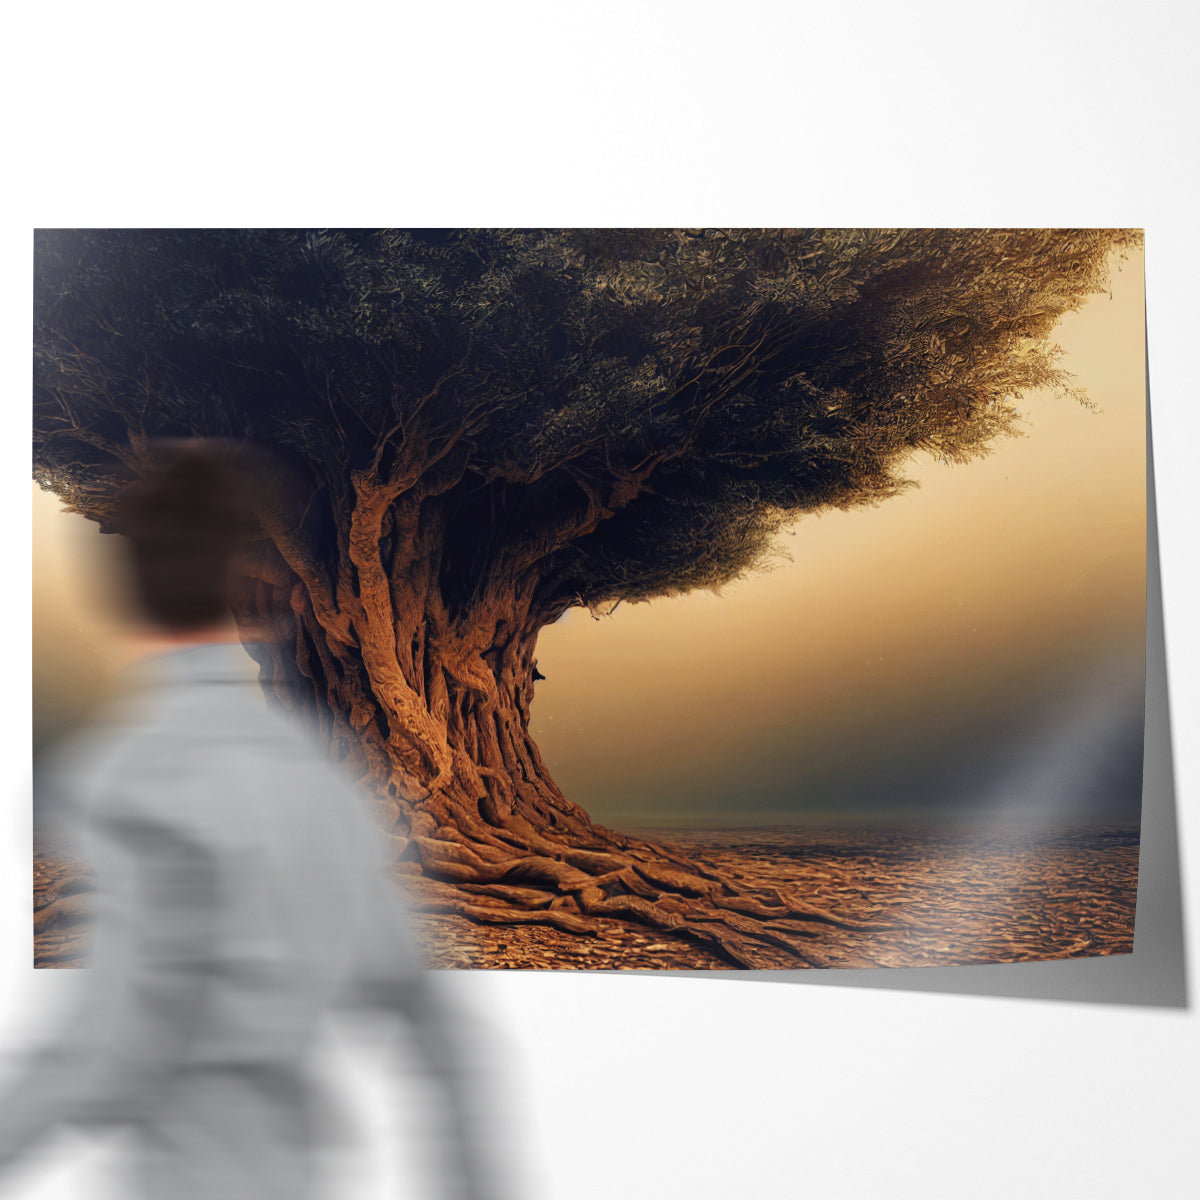 Impressive Large Tree Modern Abstract Art Posters-Horizontal Posters NOT FRAMED-CetArt-10″x8″ inches-CetArt